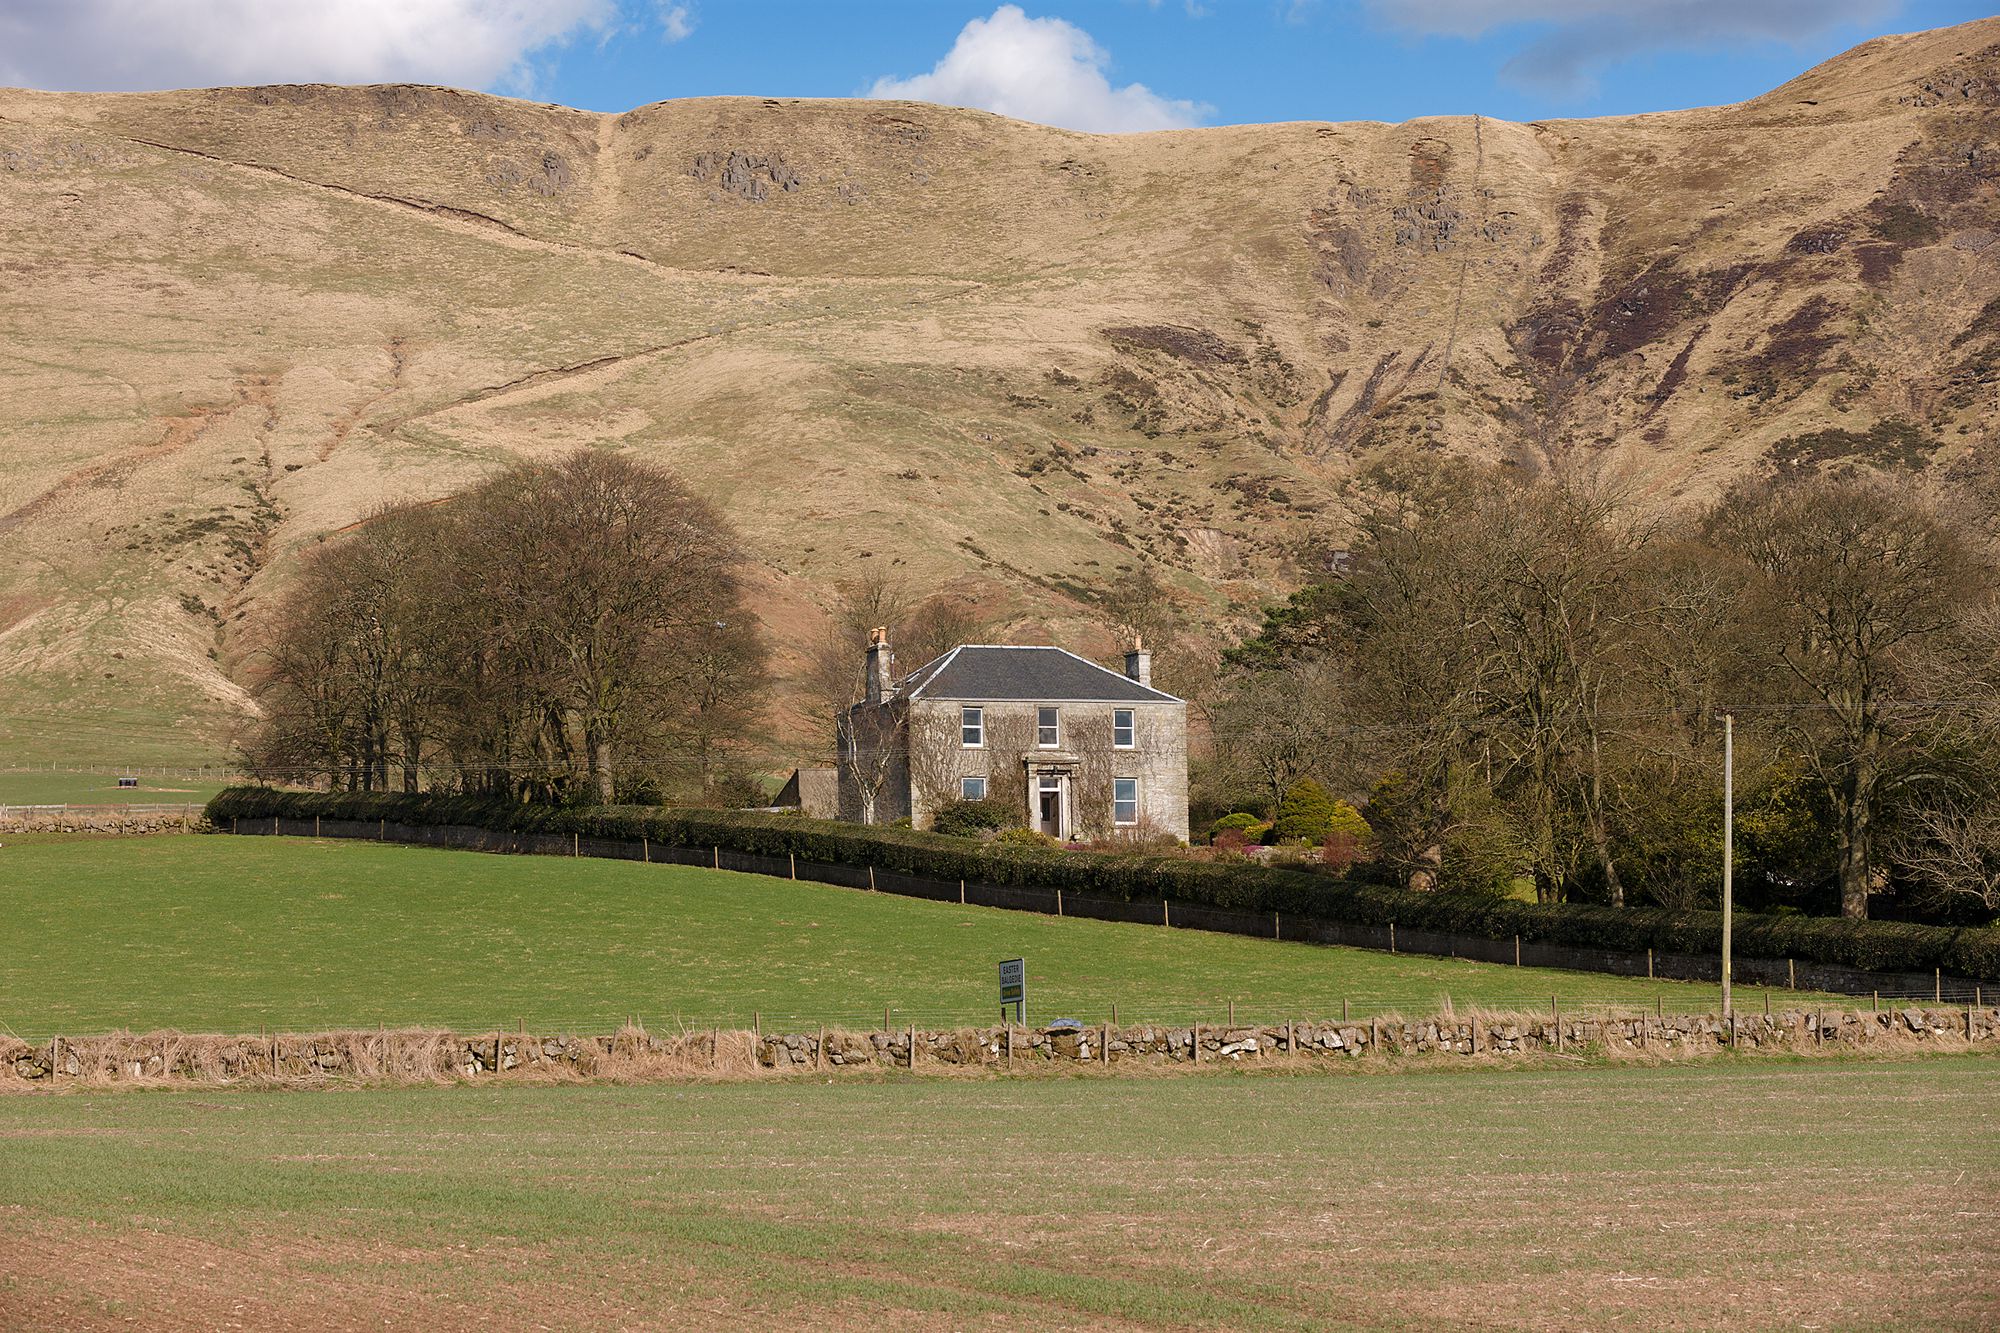 Self-Catering in Perthshire holidays at Cool Places